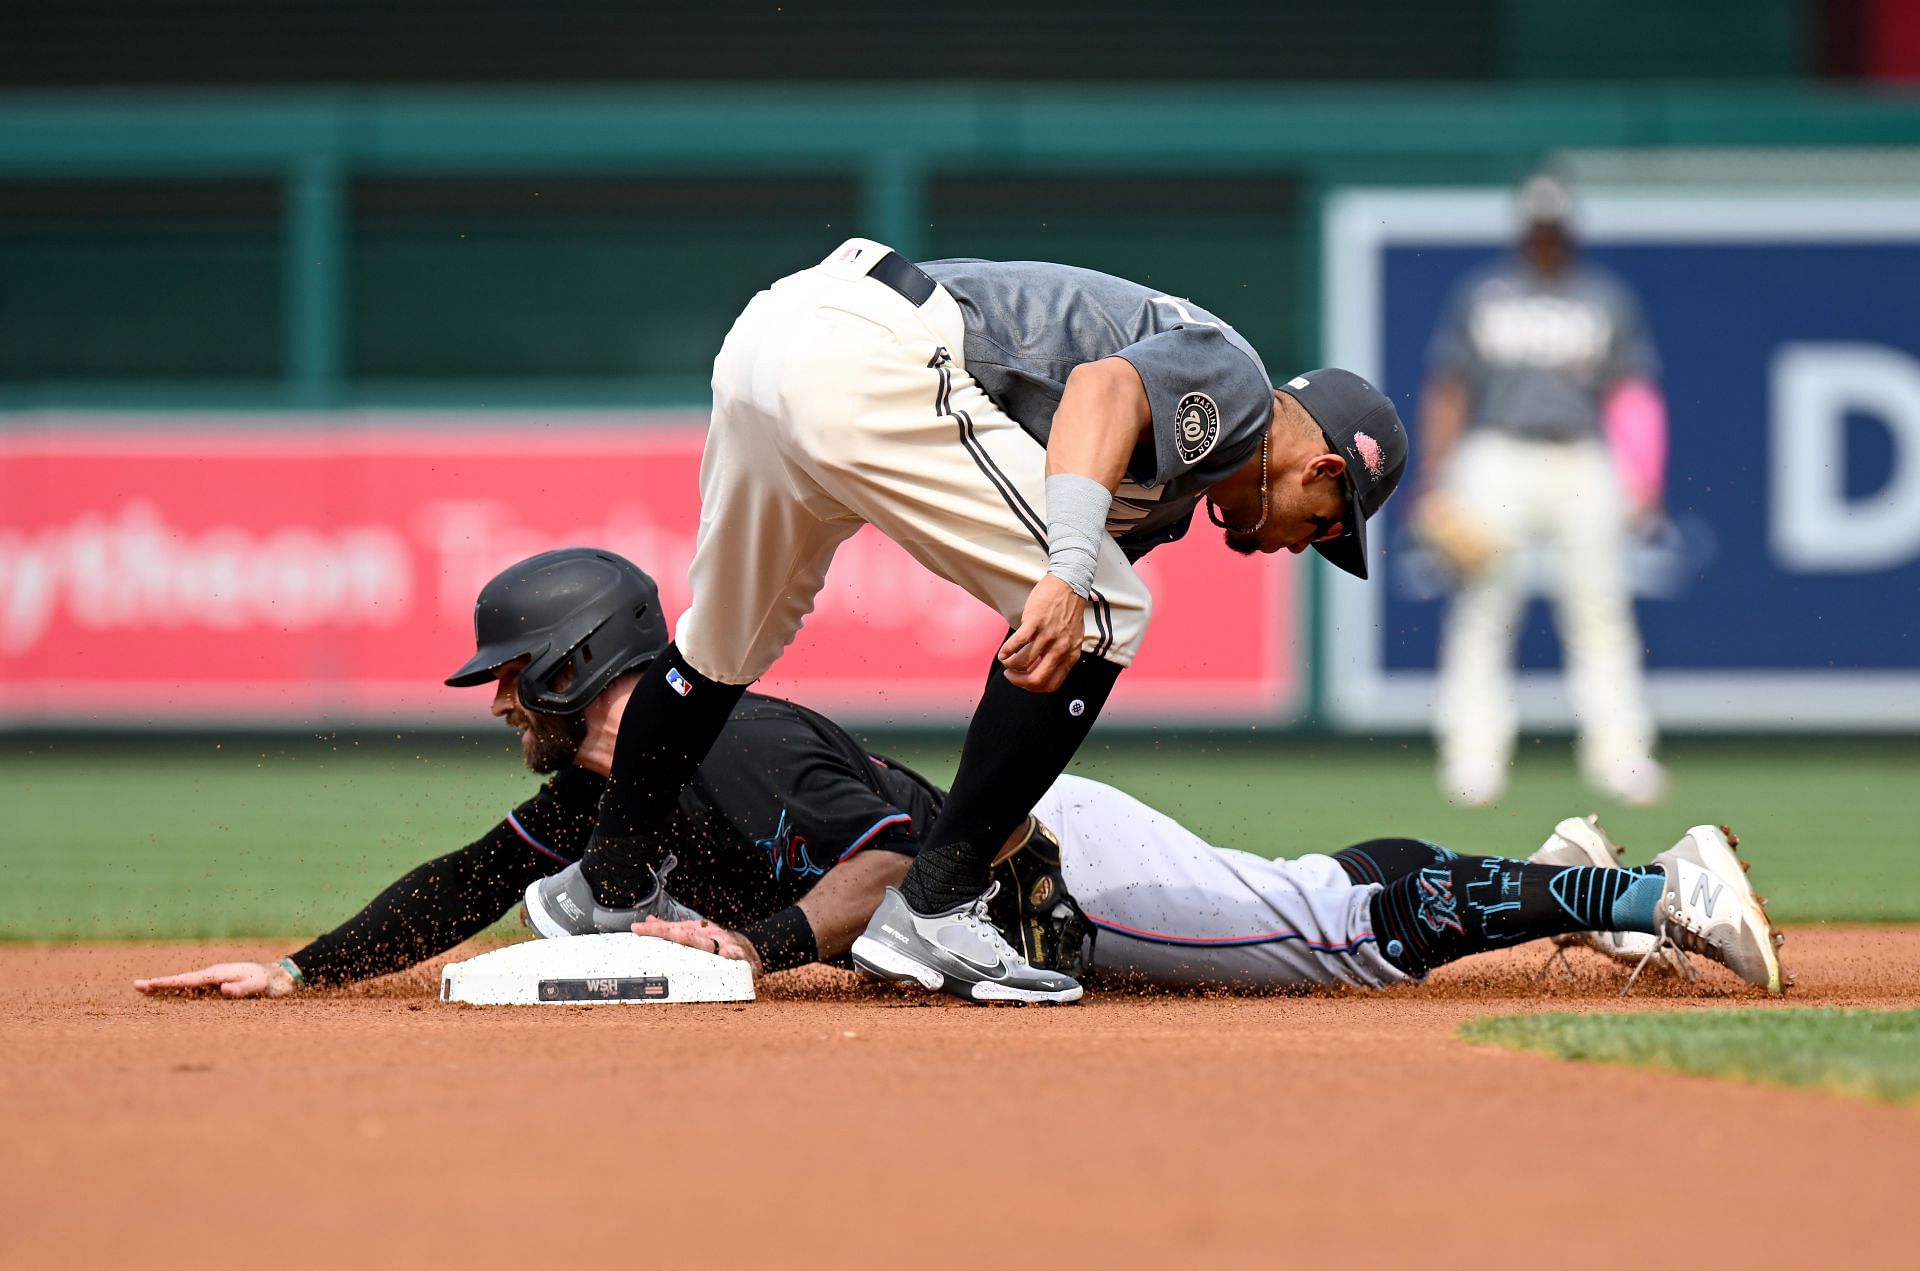 Miami Marlins and Washington Nationals fought for last place